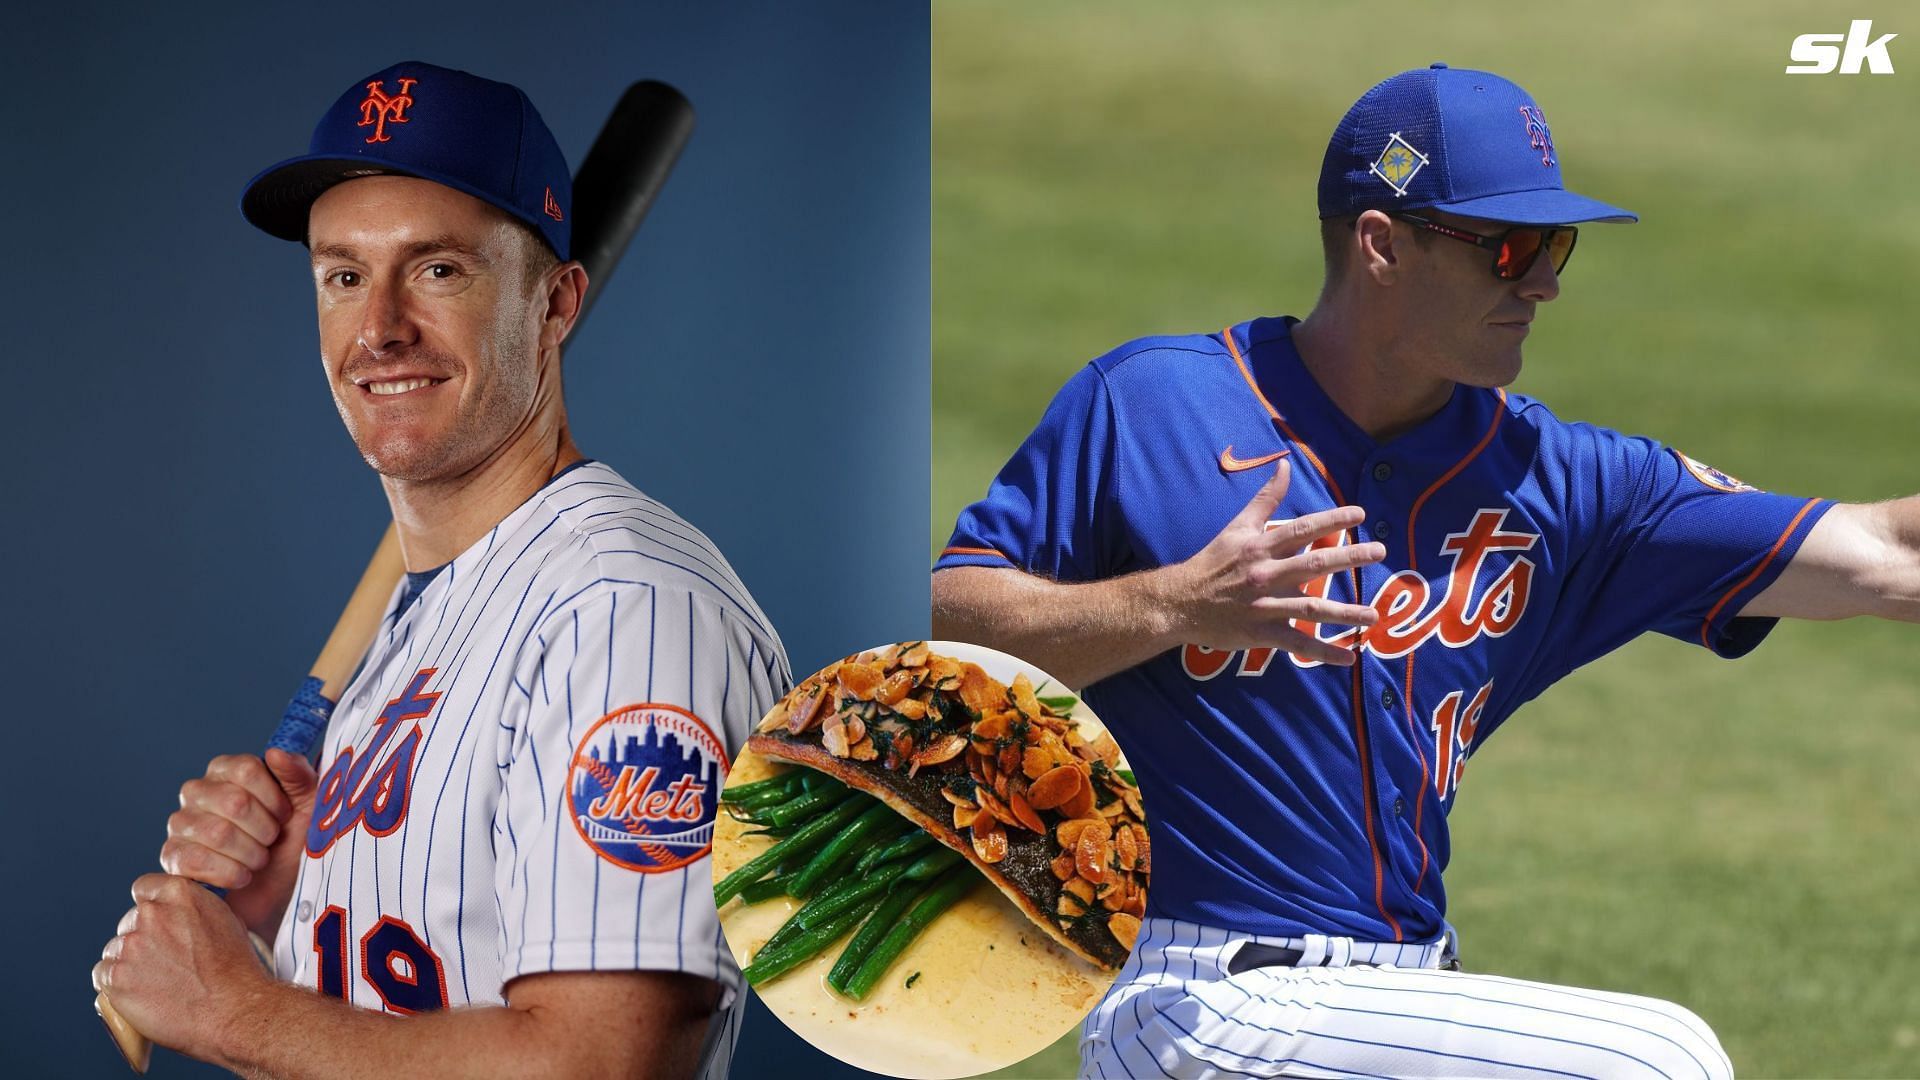 New York Mets: New York Mets outfielder and food blogger Mark Canha aspires  to come to aid of baseball fans through his culinary book